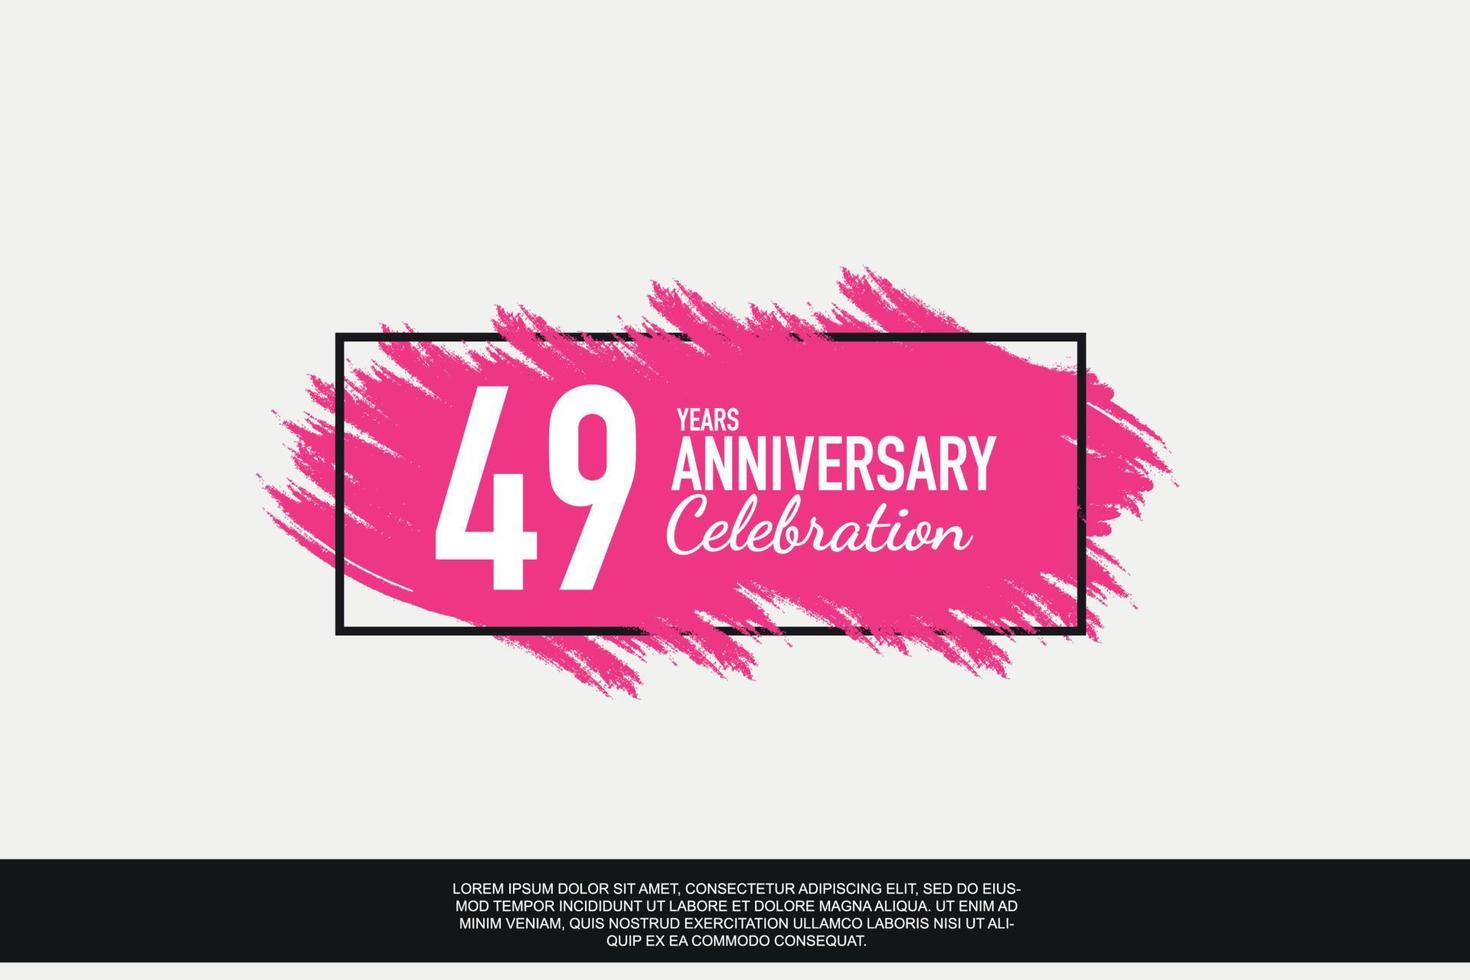 49 year anniversary celebration vector pink design in black frame on white background abstract illustration logo